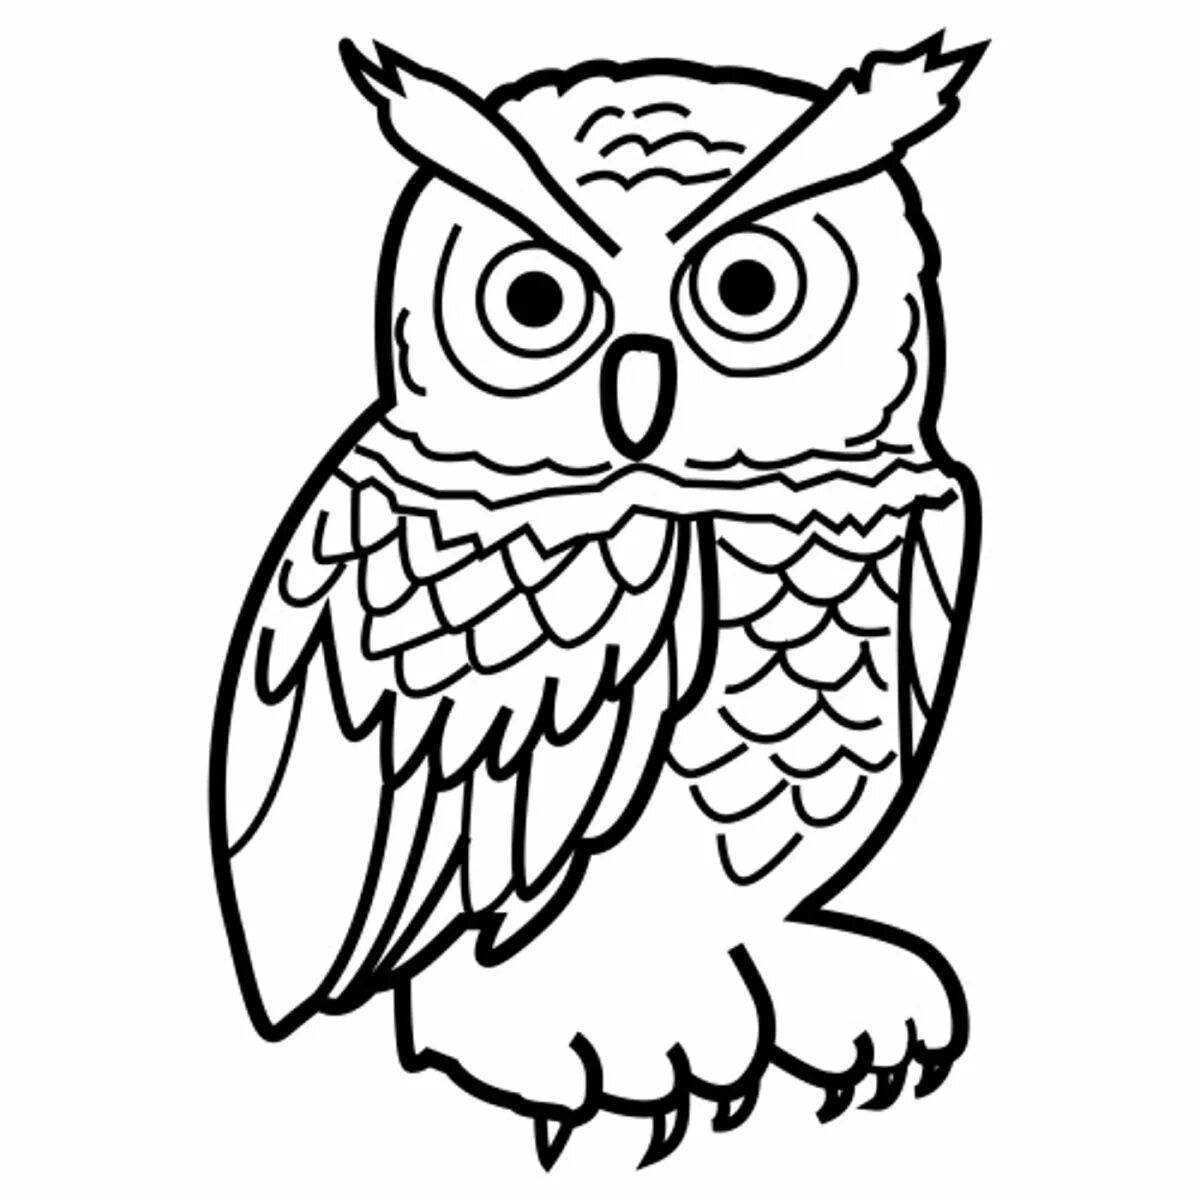 A fascinating long-eared owl coloring book